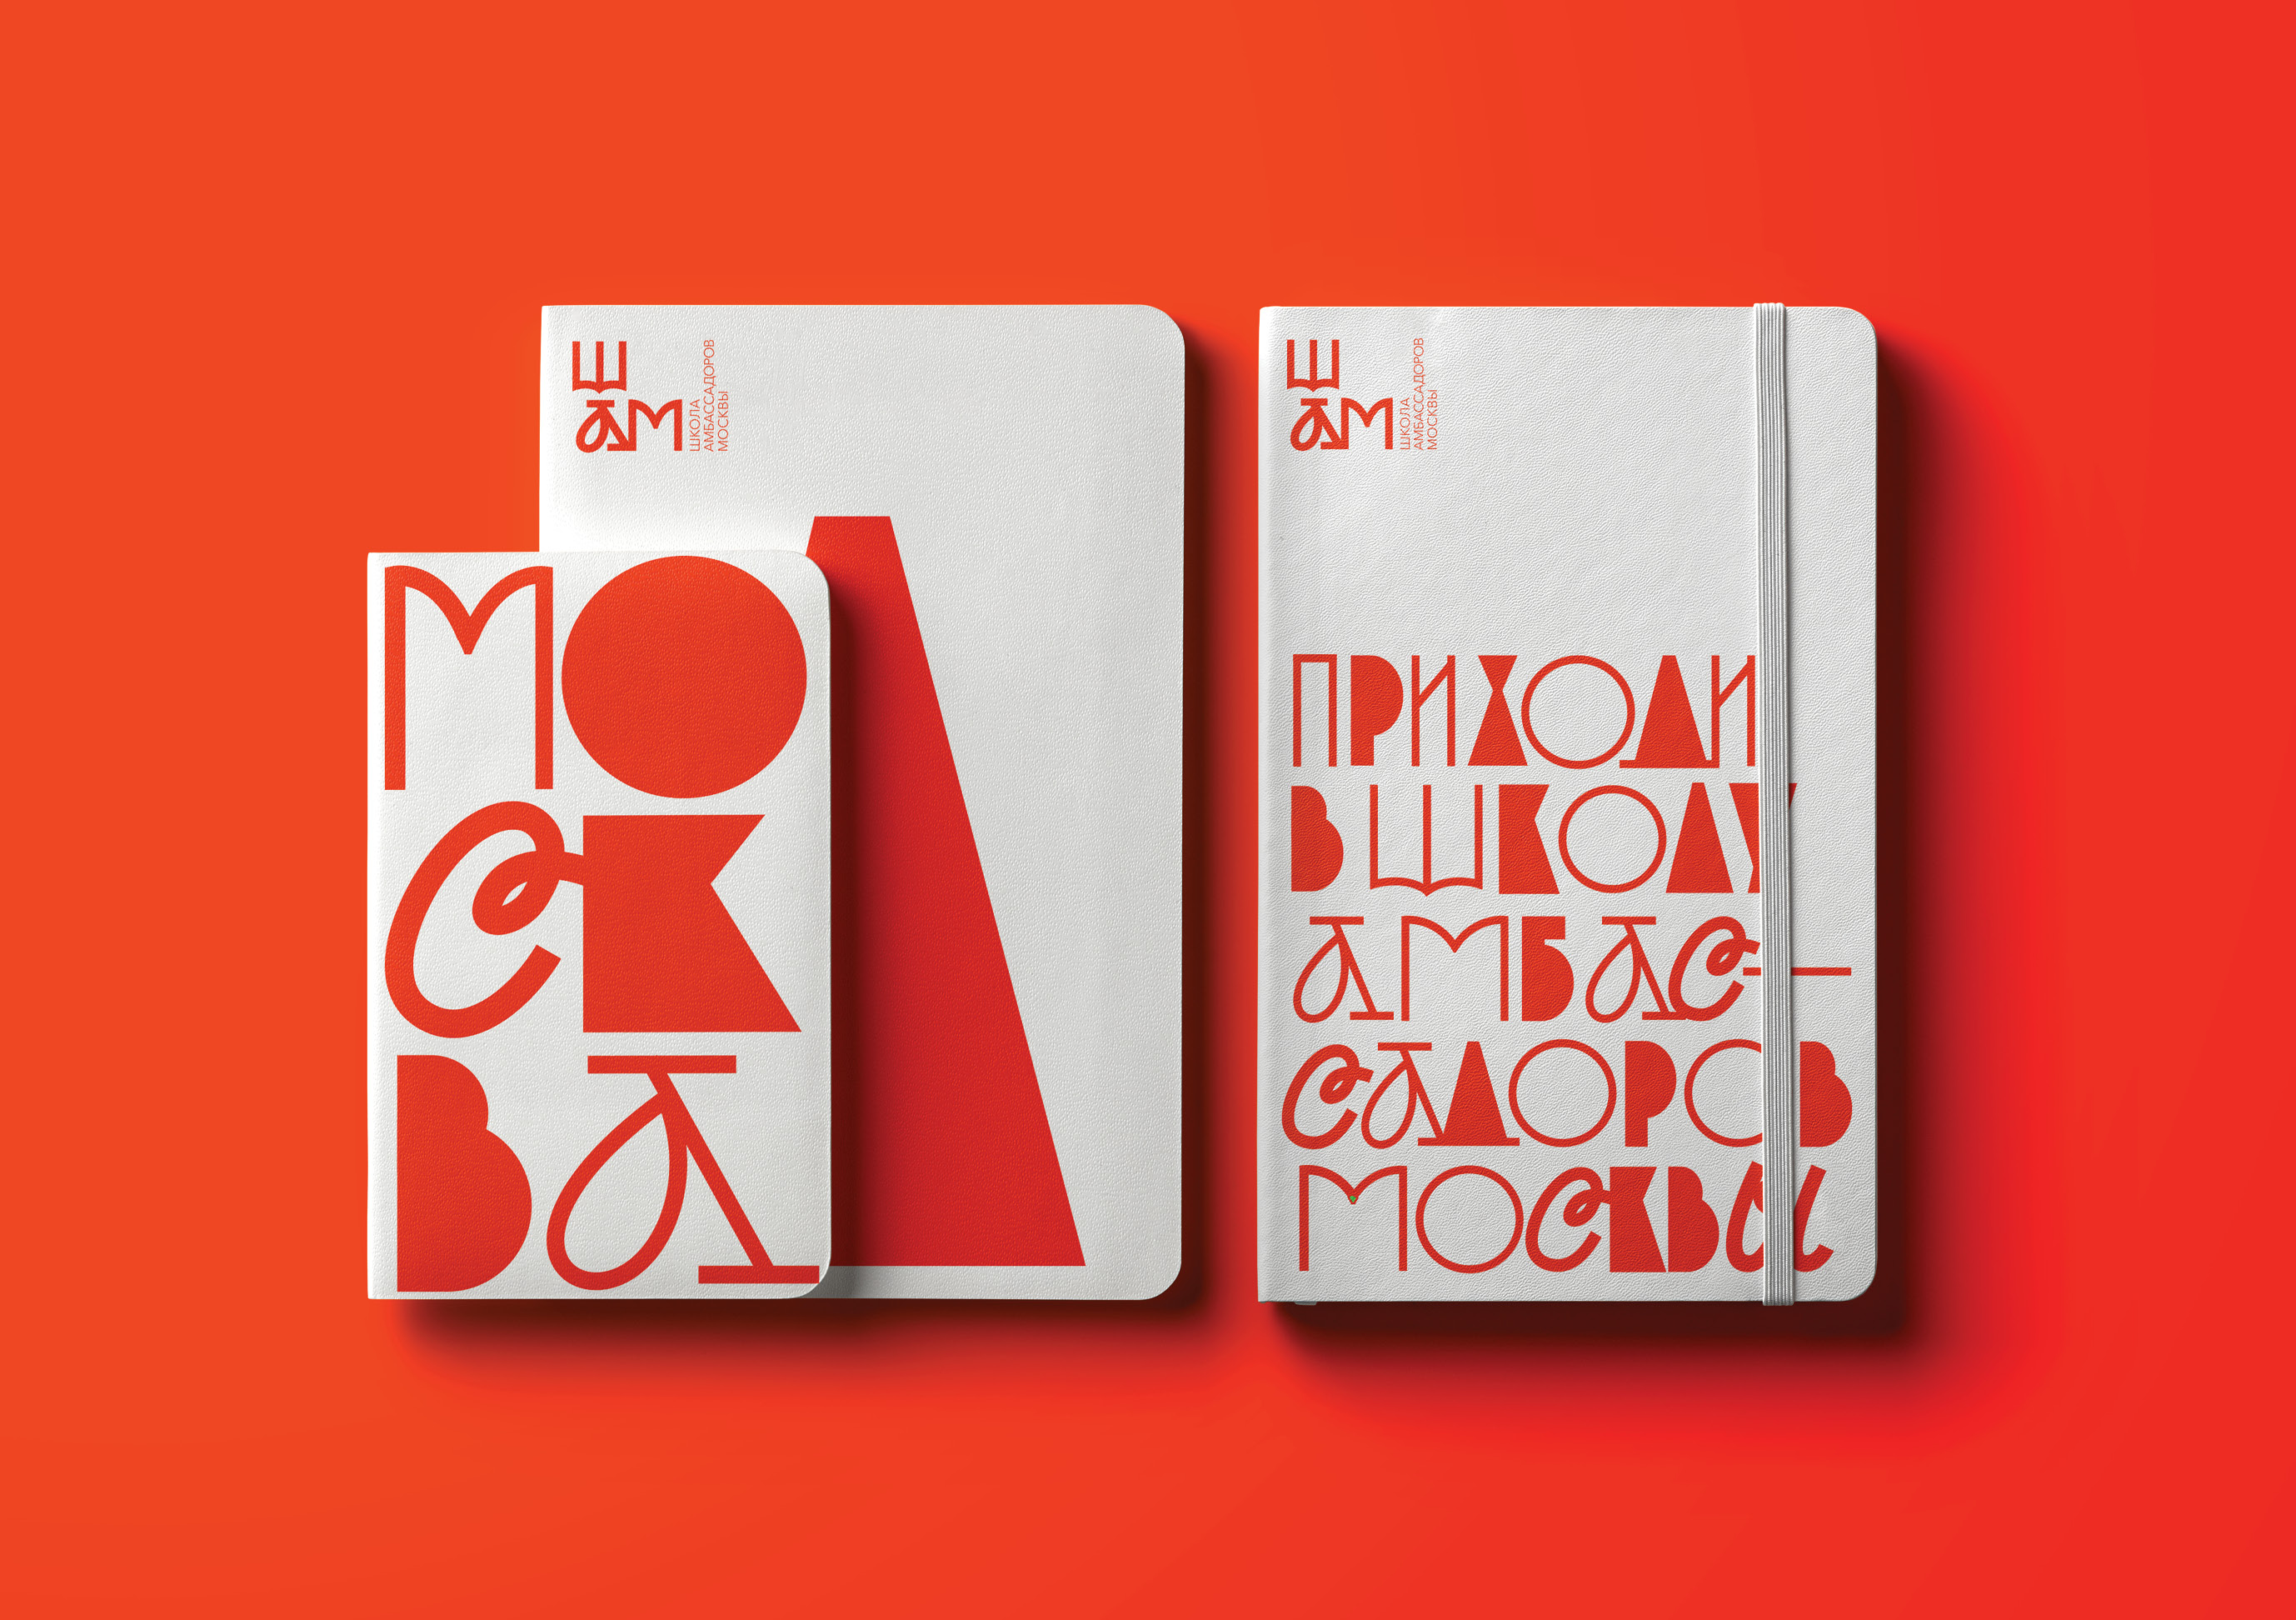 The School of Ambassadors of Moscow Branding Concept Design by Tanya Dunaeva